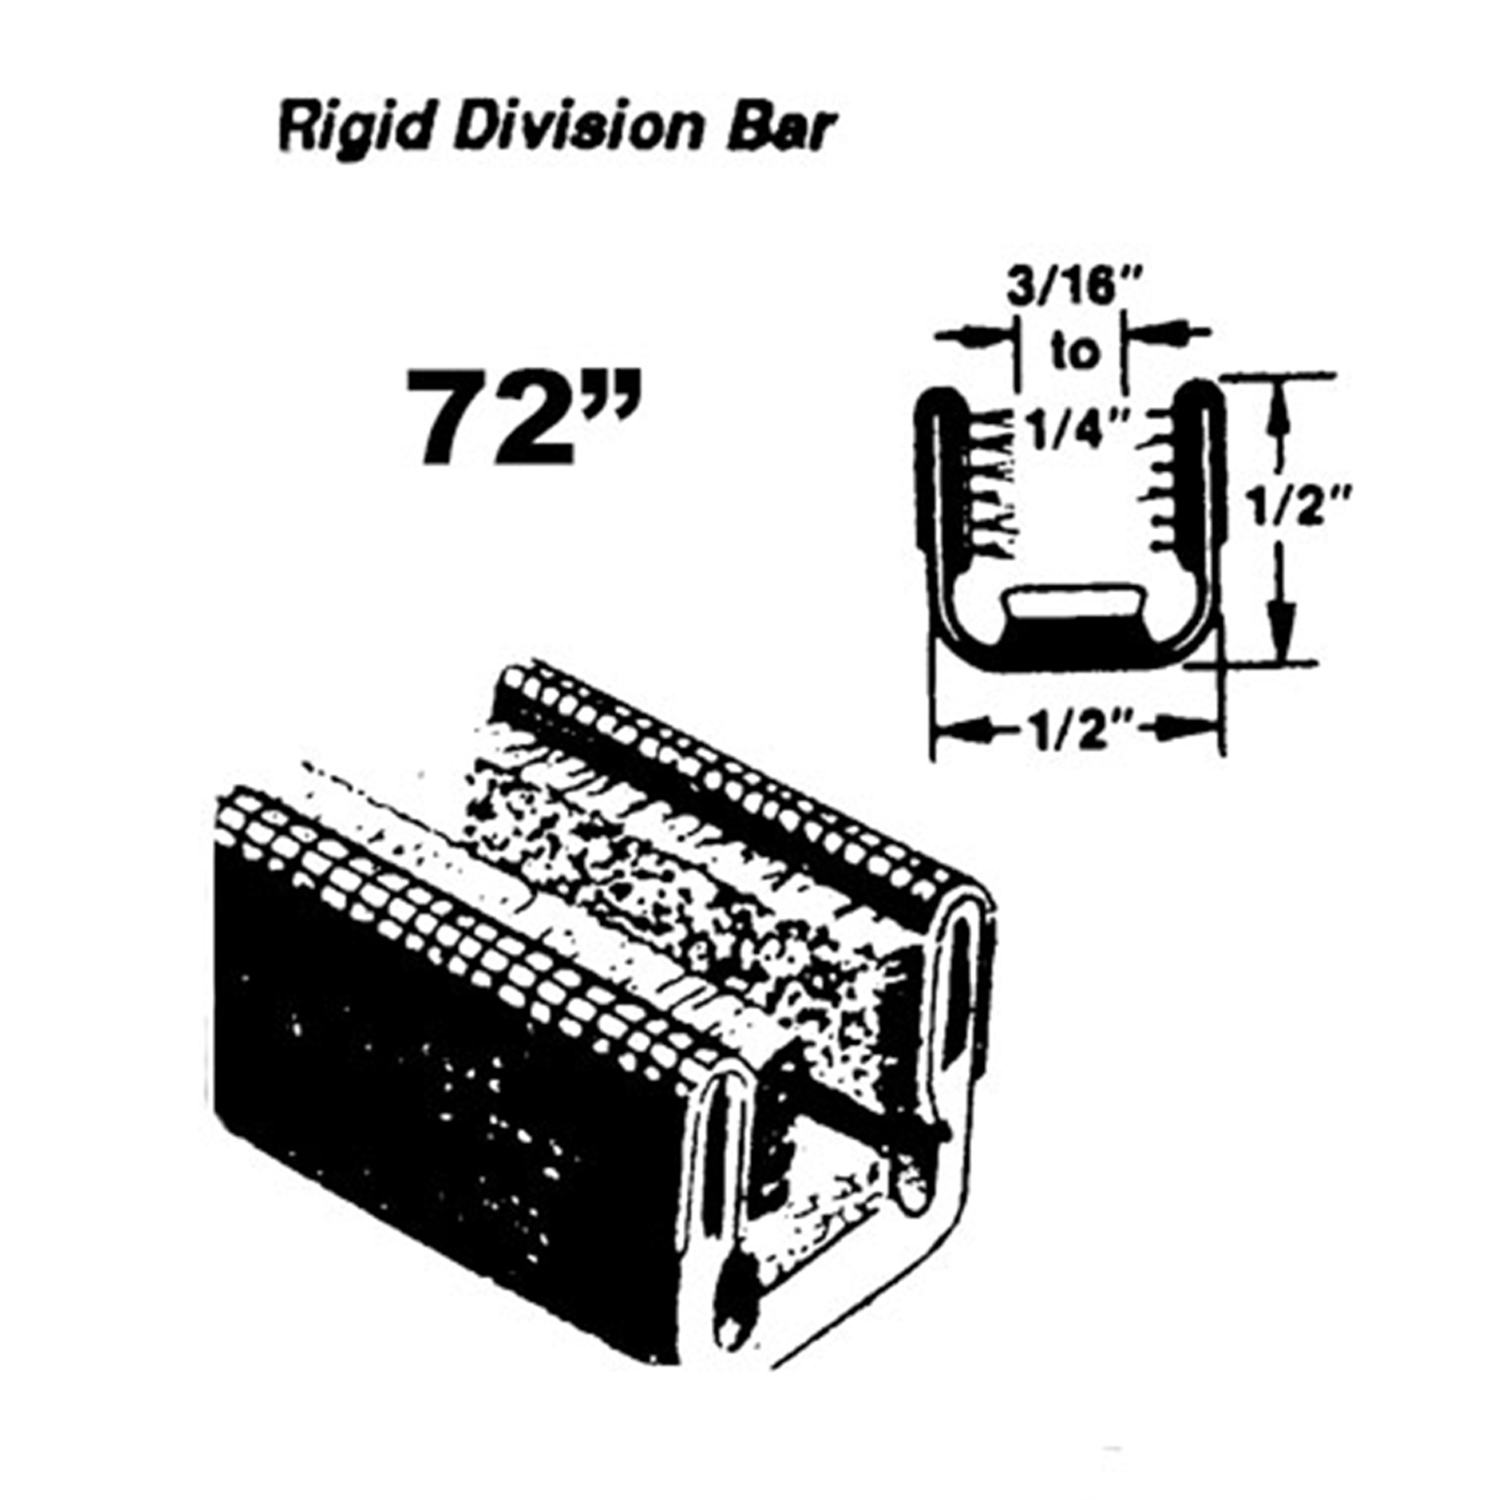 1954 GMC Truck Upper and lower rigid division-bar channel-WC 25-72